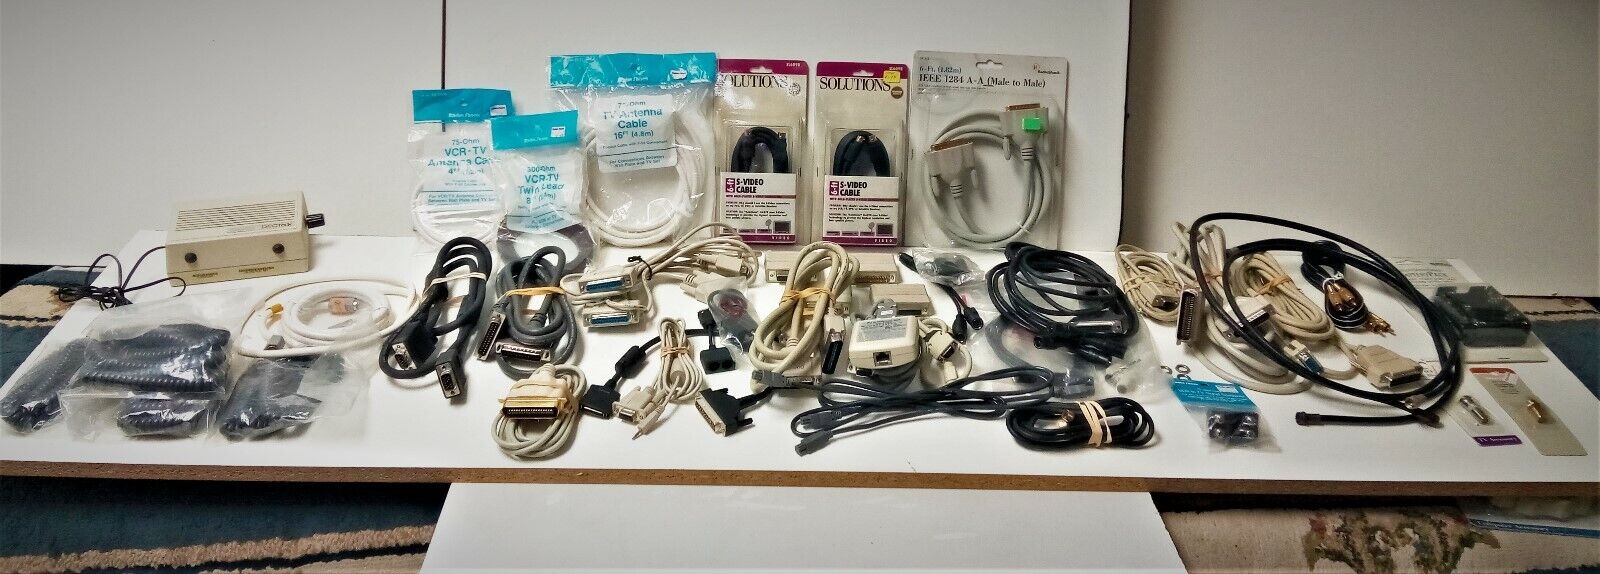 HUGE Lot Of Electronics Phone & Computer Cables Switches Connectors NOS